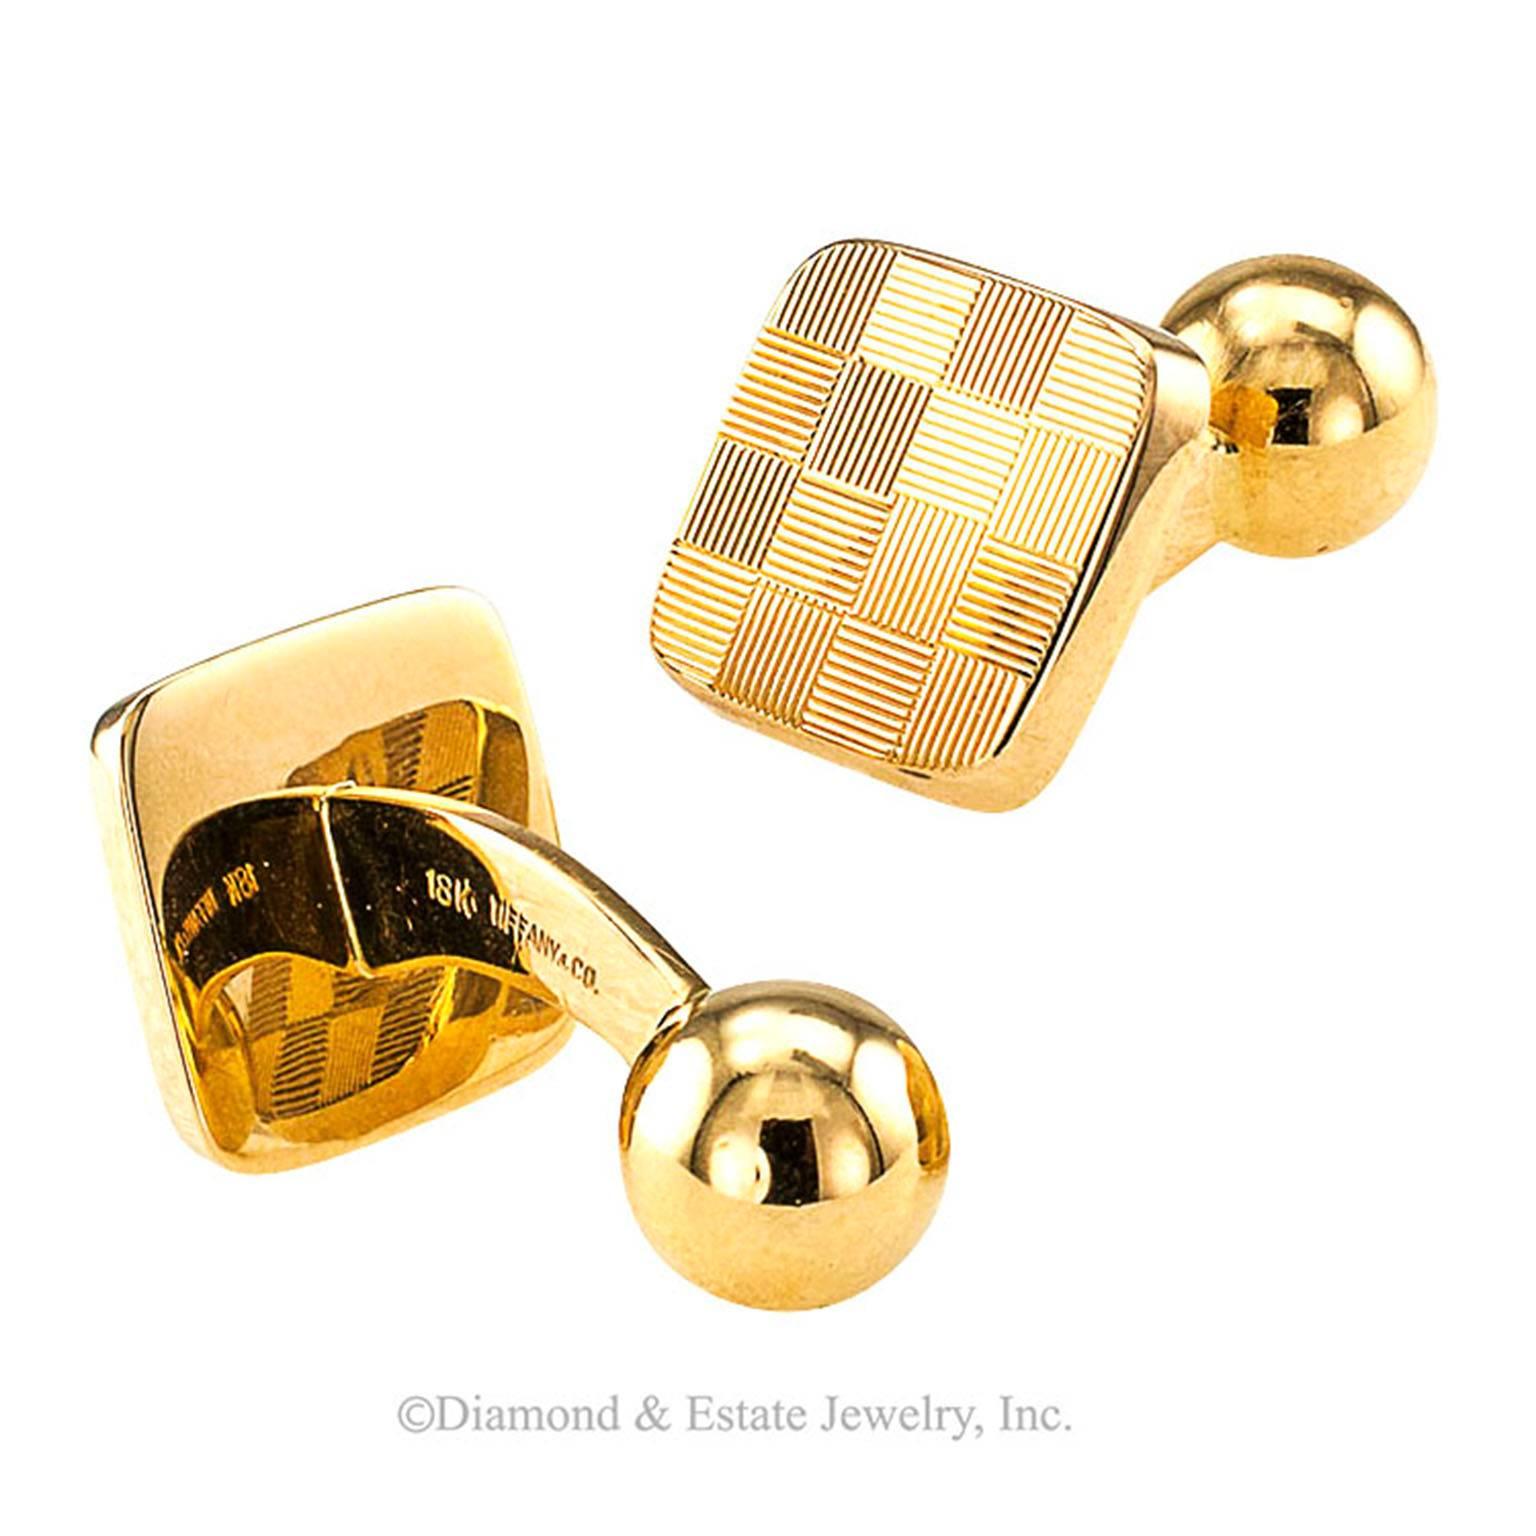 Tiffany & Co. 18-Karat Gold Checkerboard Cufflinks

Checkerboard pattern Tiffany & Co. 18-karat gold cufflinks, circa 1970. Tiffany does it just right every time.  Their styling is always impeccable as illustrated by this outstanding pair of